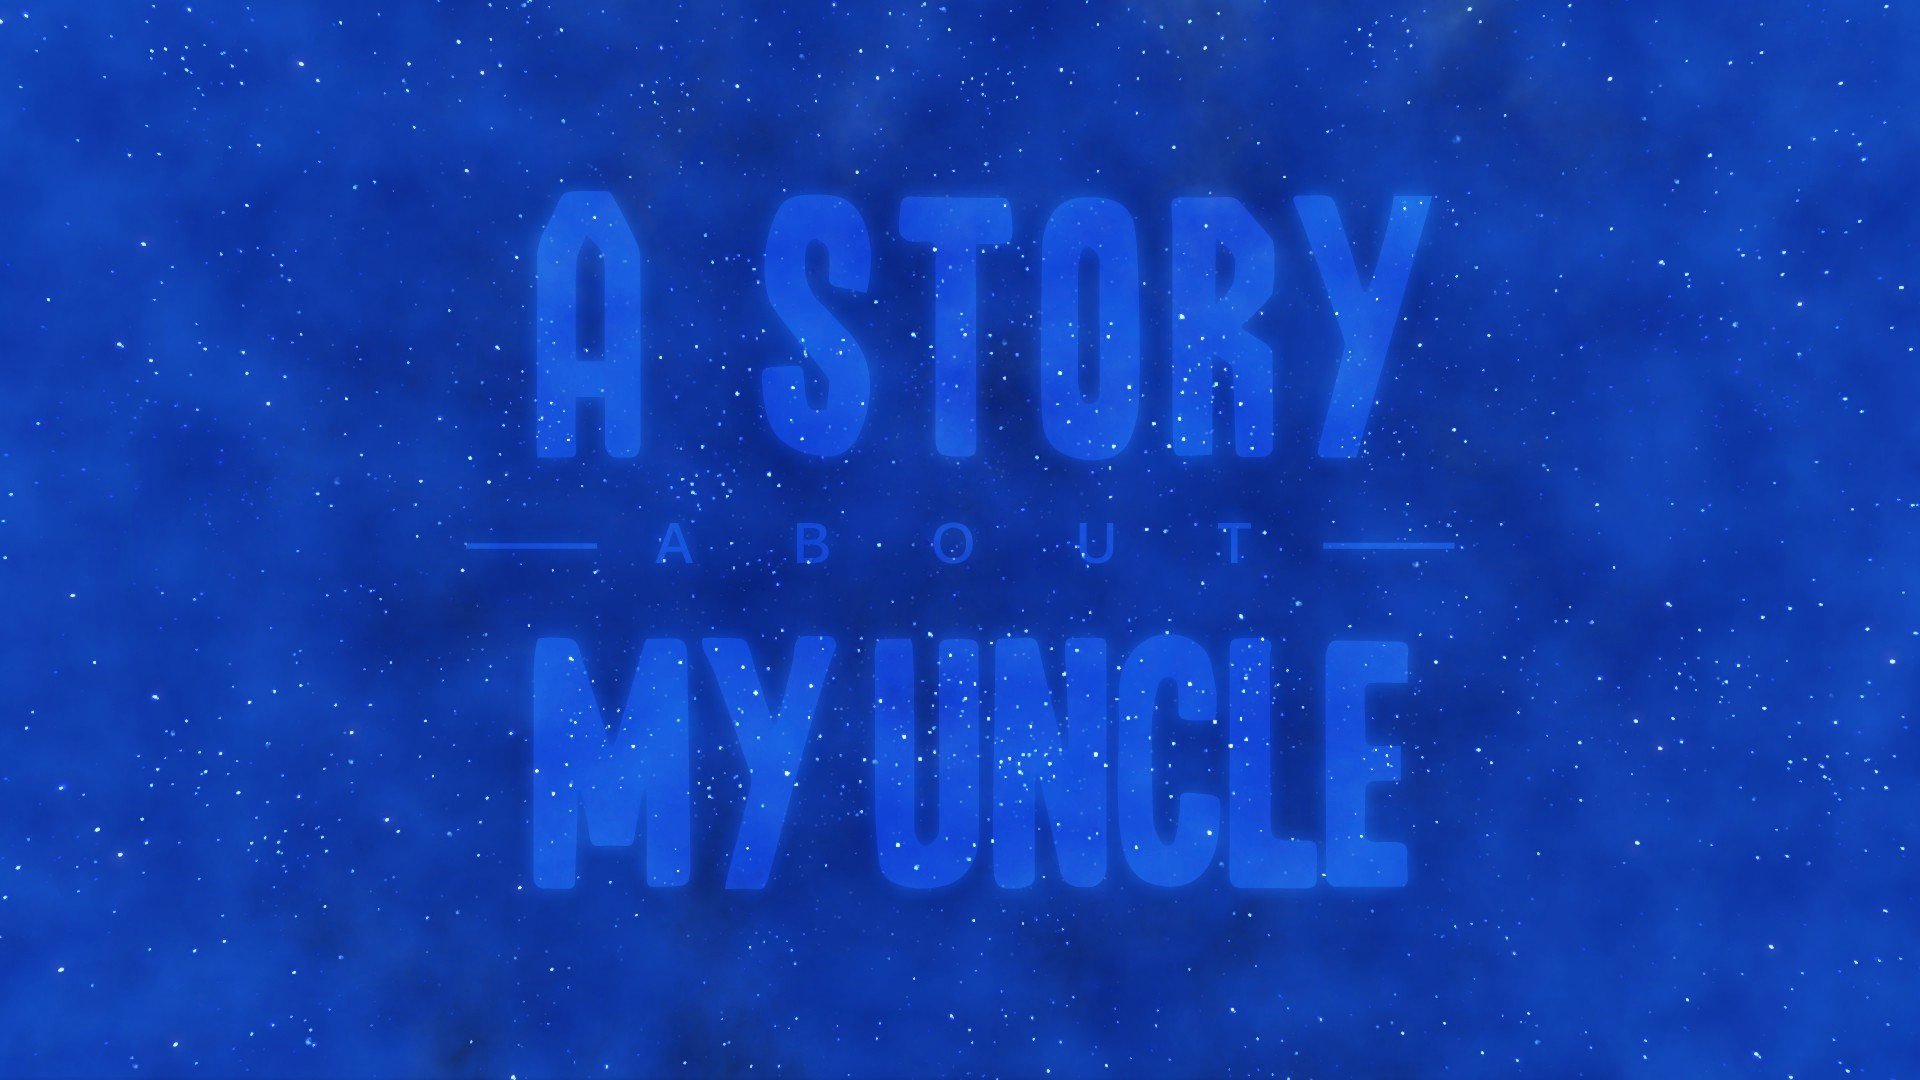 A Story About My Uncle, Stars, PC gaming, ASAMU, RPG, Starry night Wallpaper